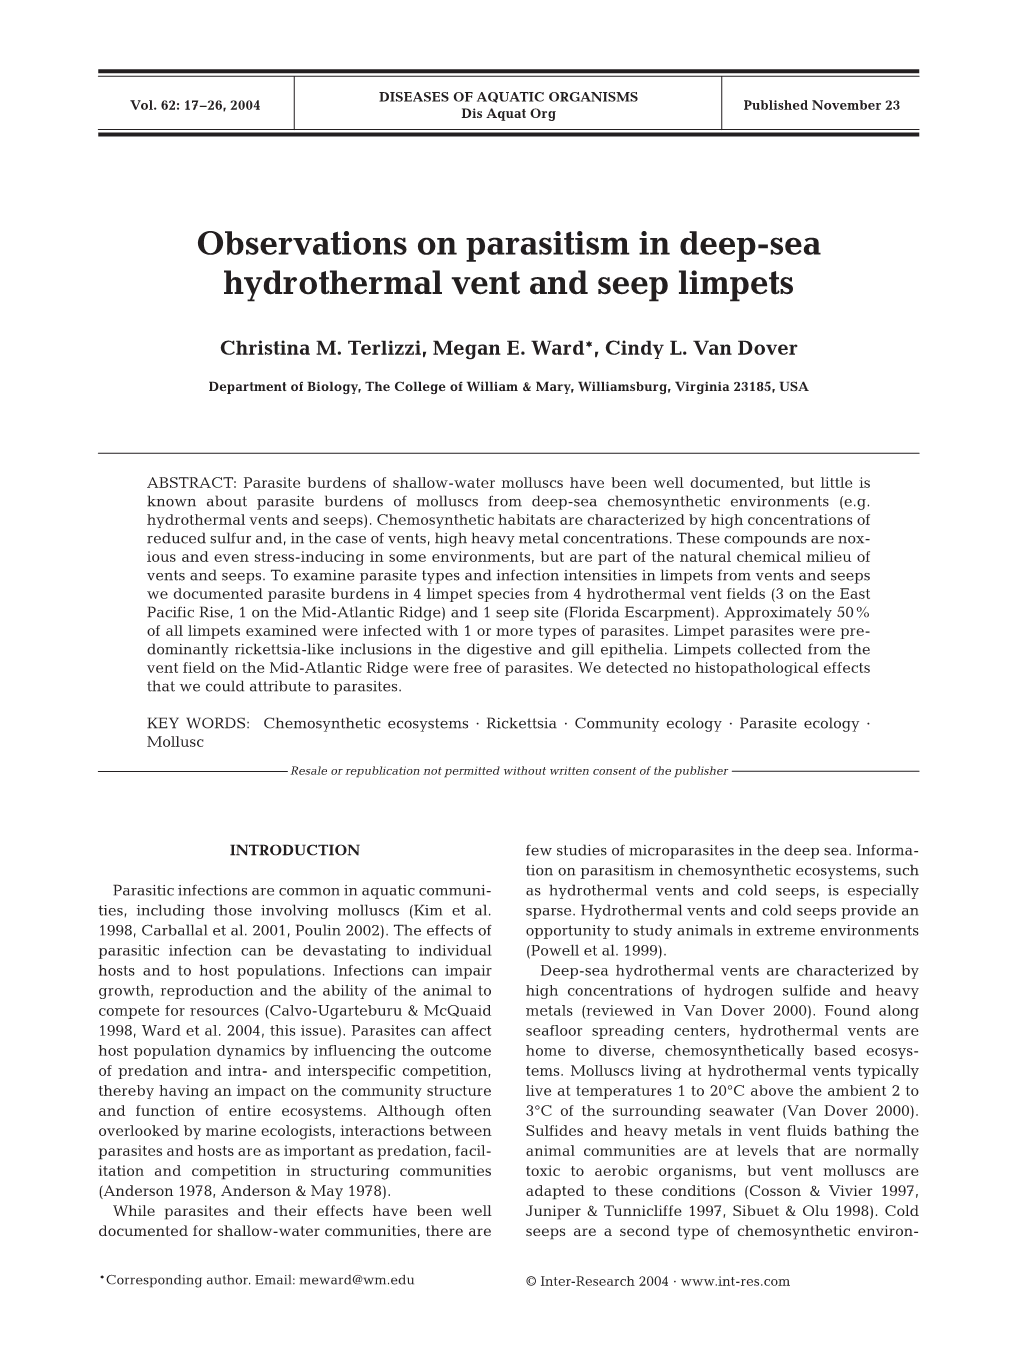 Observations on Parasitism in Deep-Sea Hydrothermal Vent and Seep Limpets